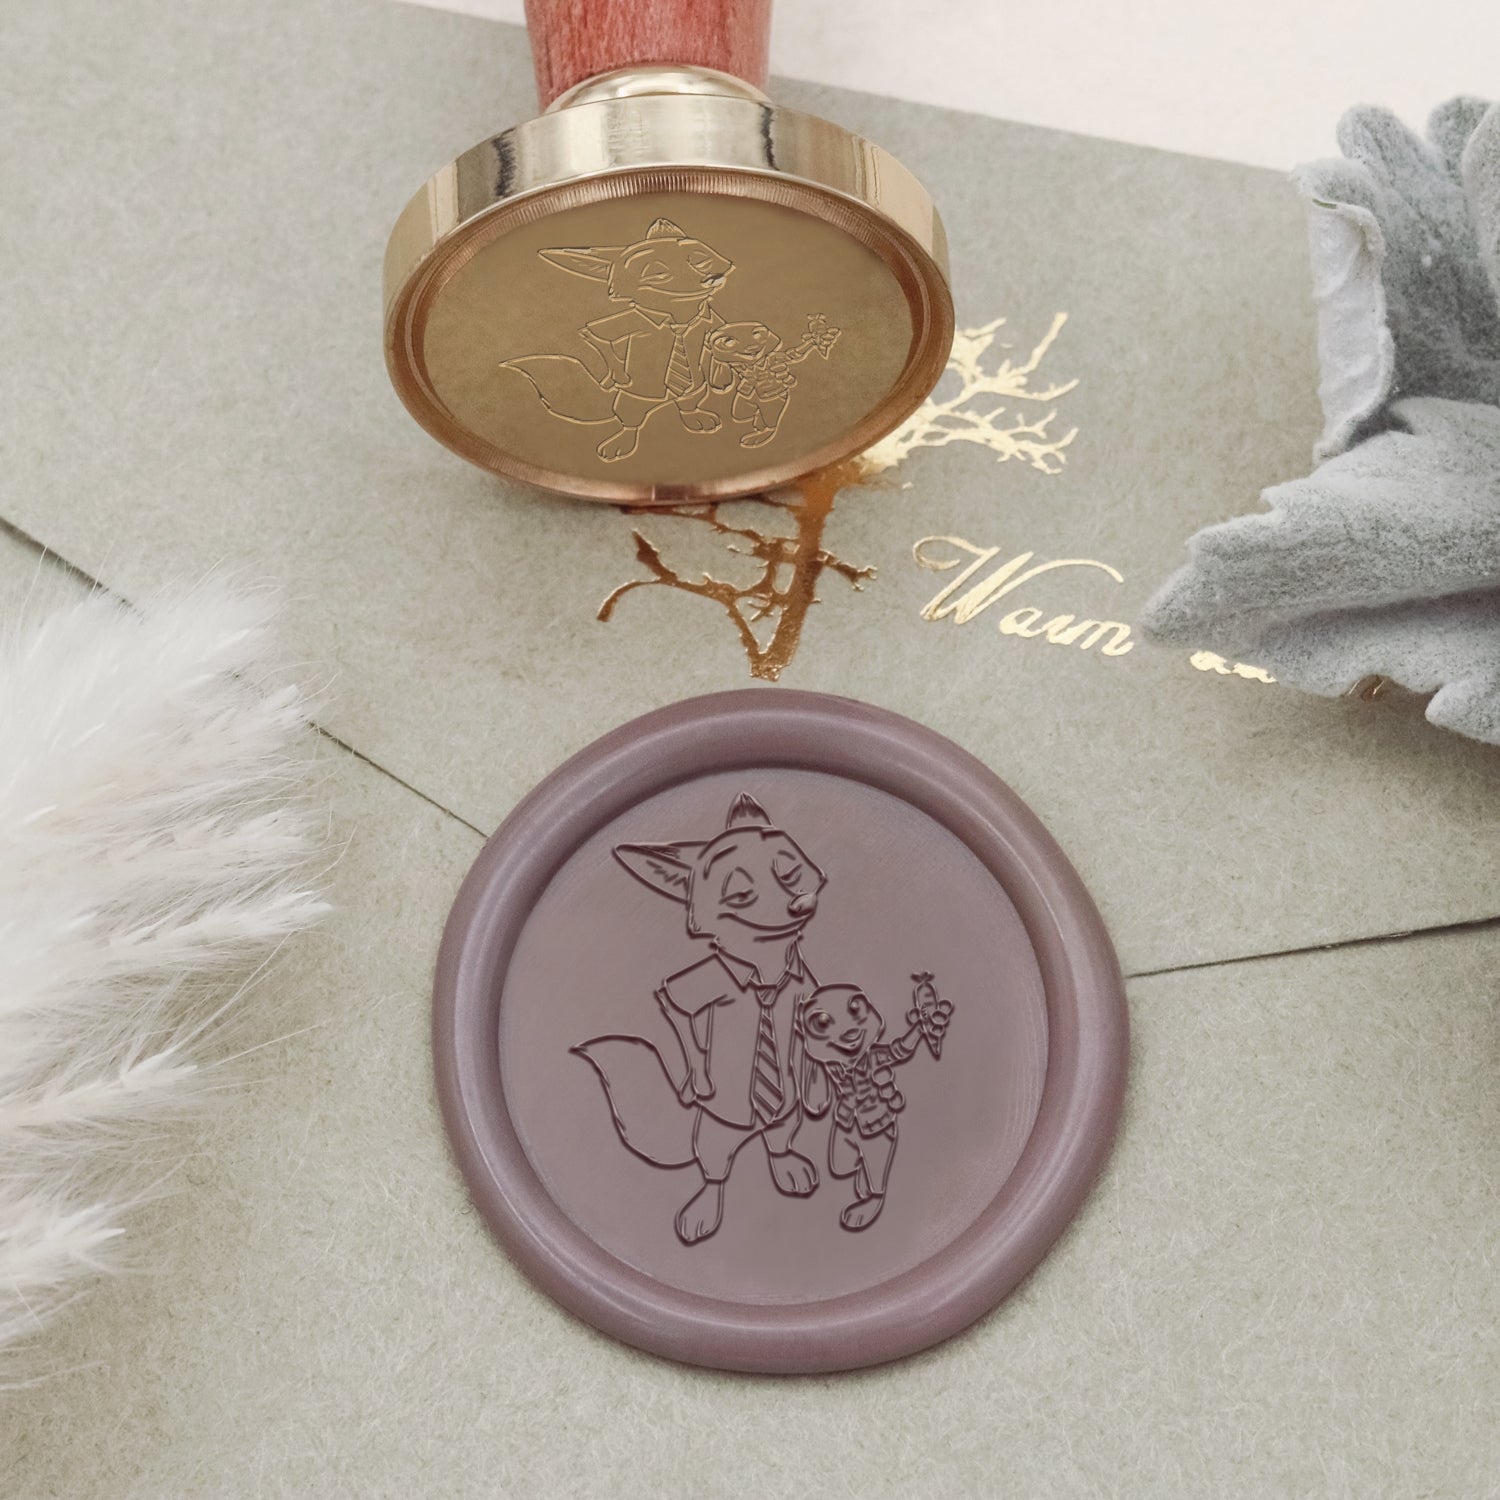 Animated Film Fairytale Character Wax Seal Stamp - 24 2